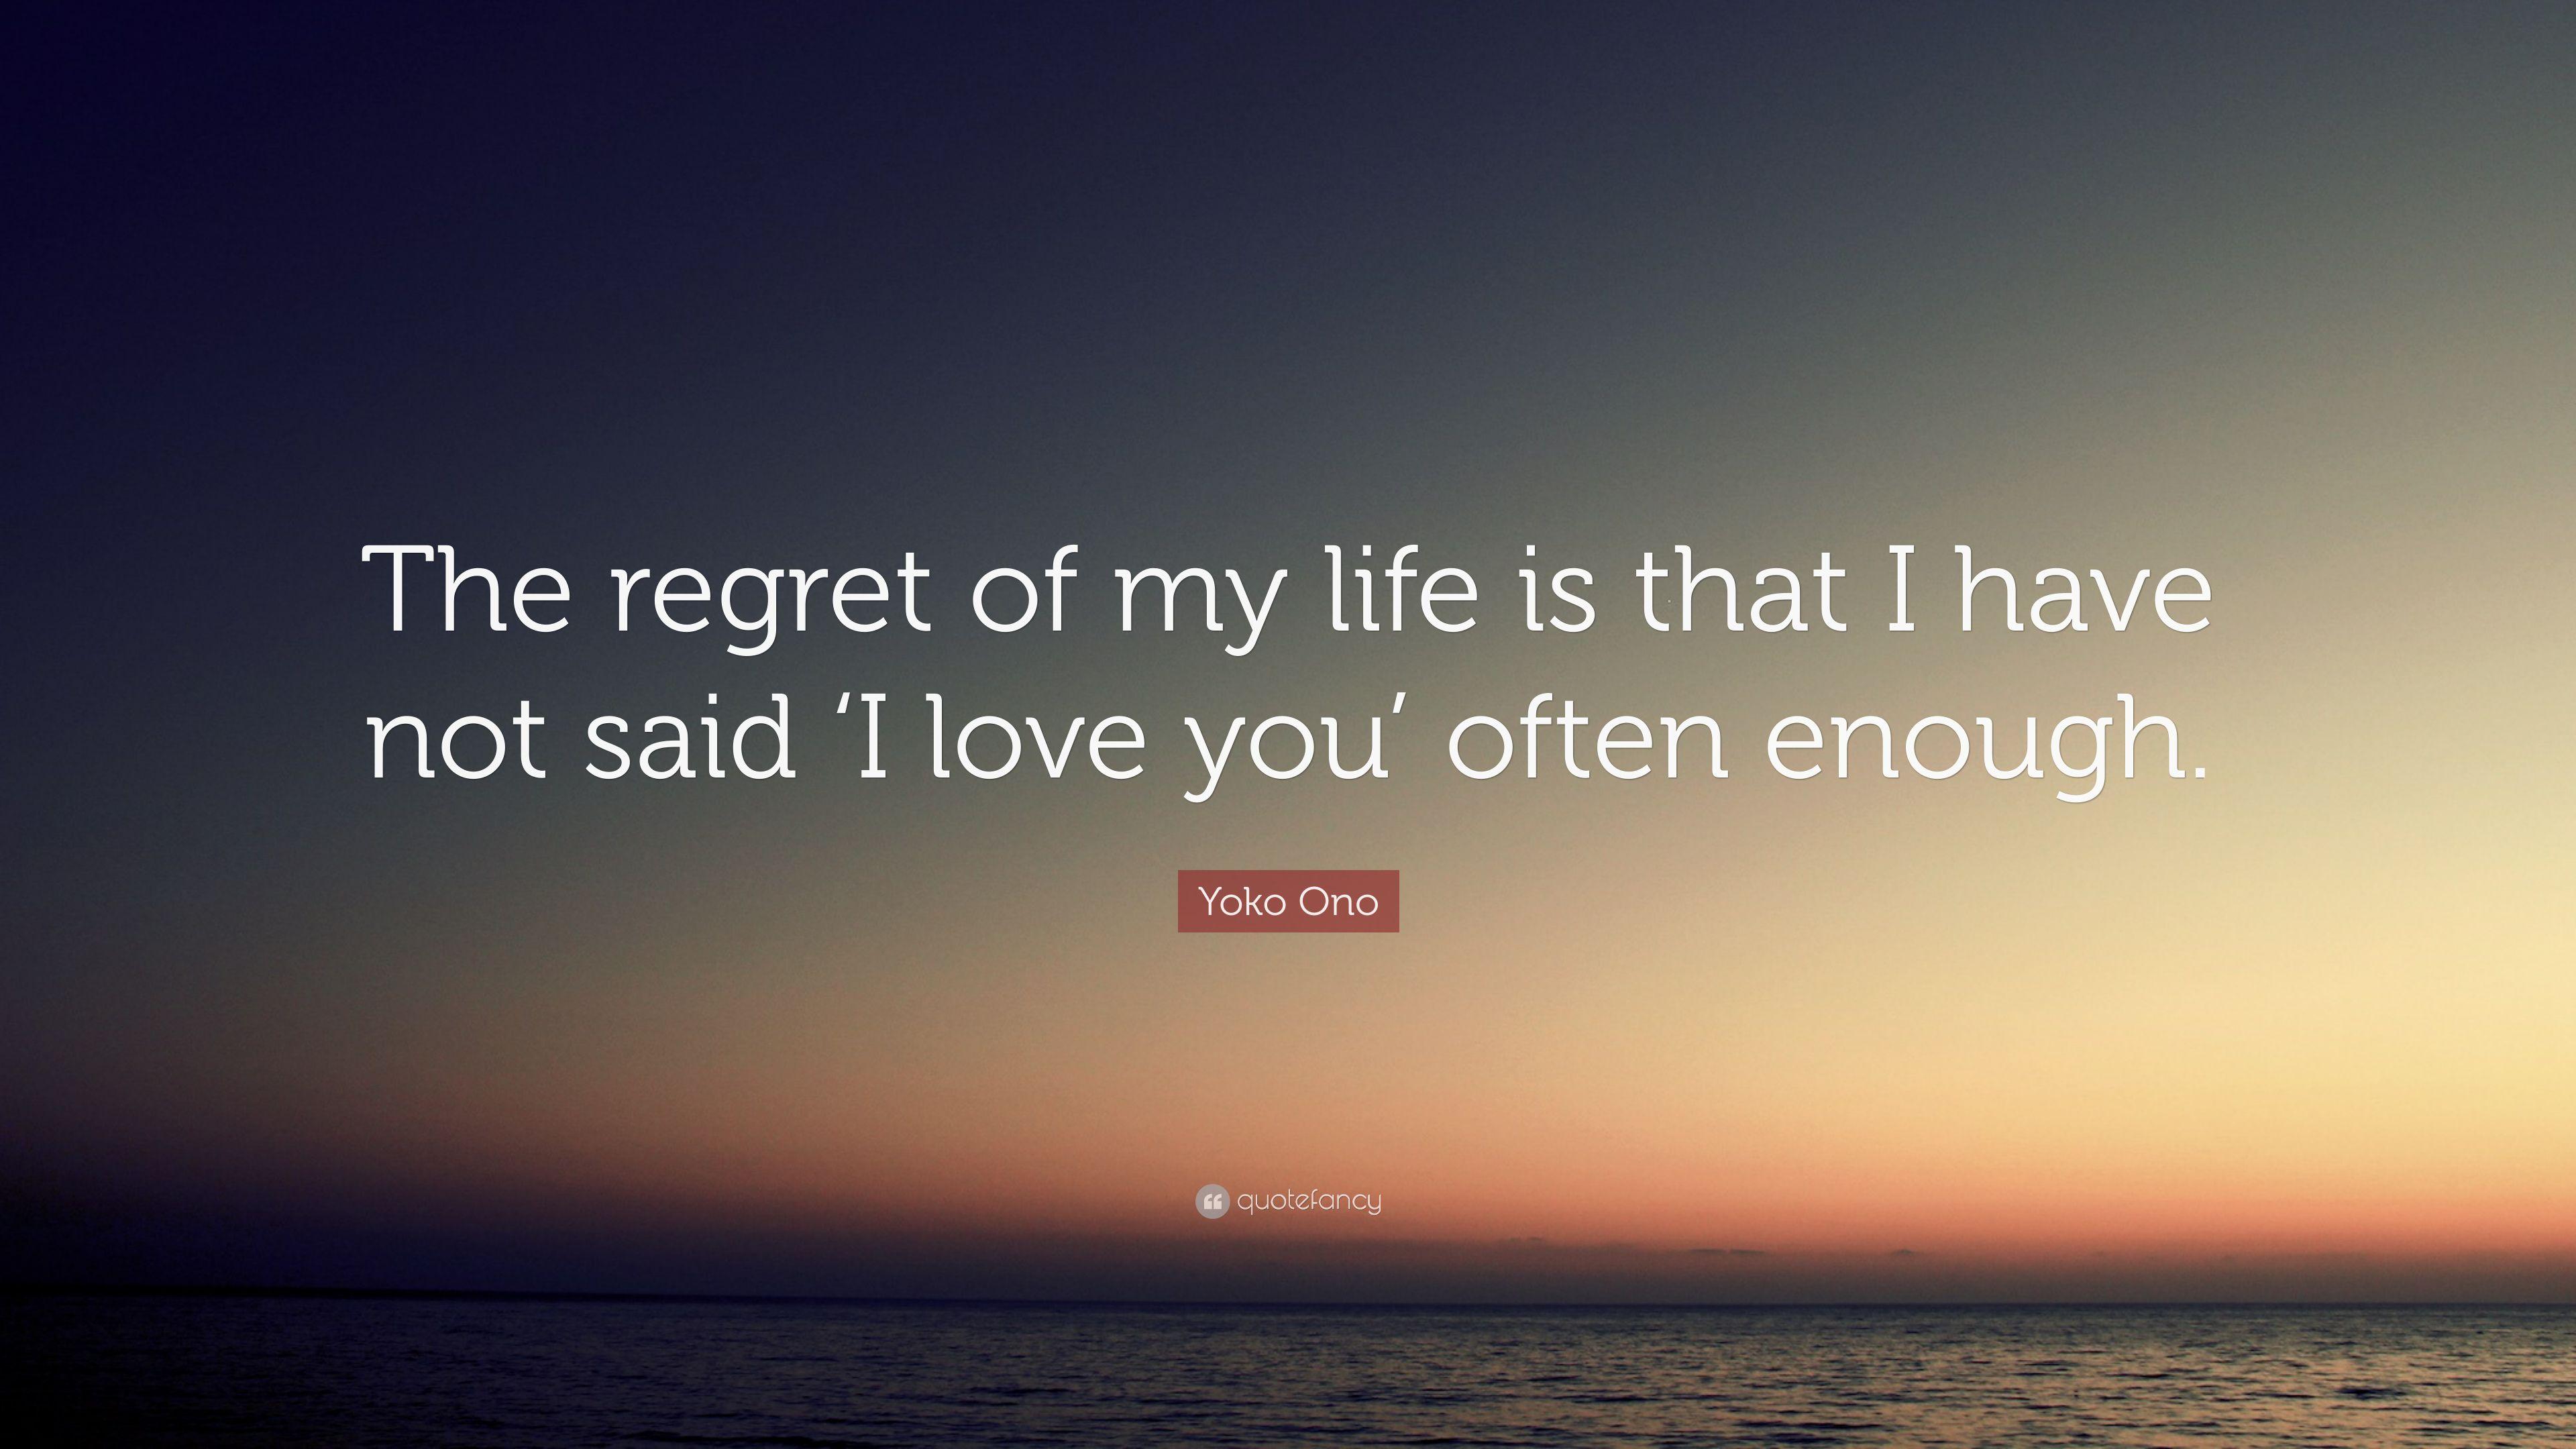 Yoko Ono Quote: “The regret of my life is that I have not said 'I